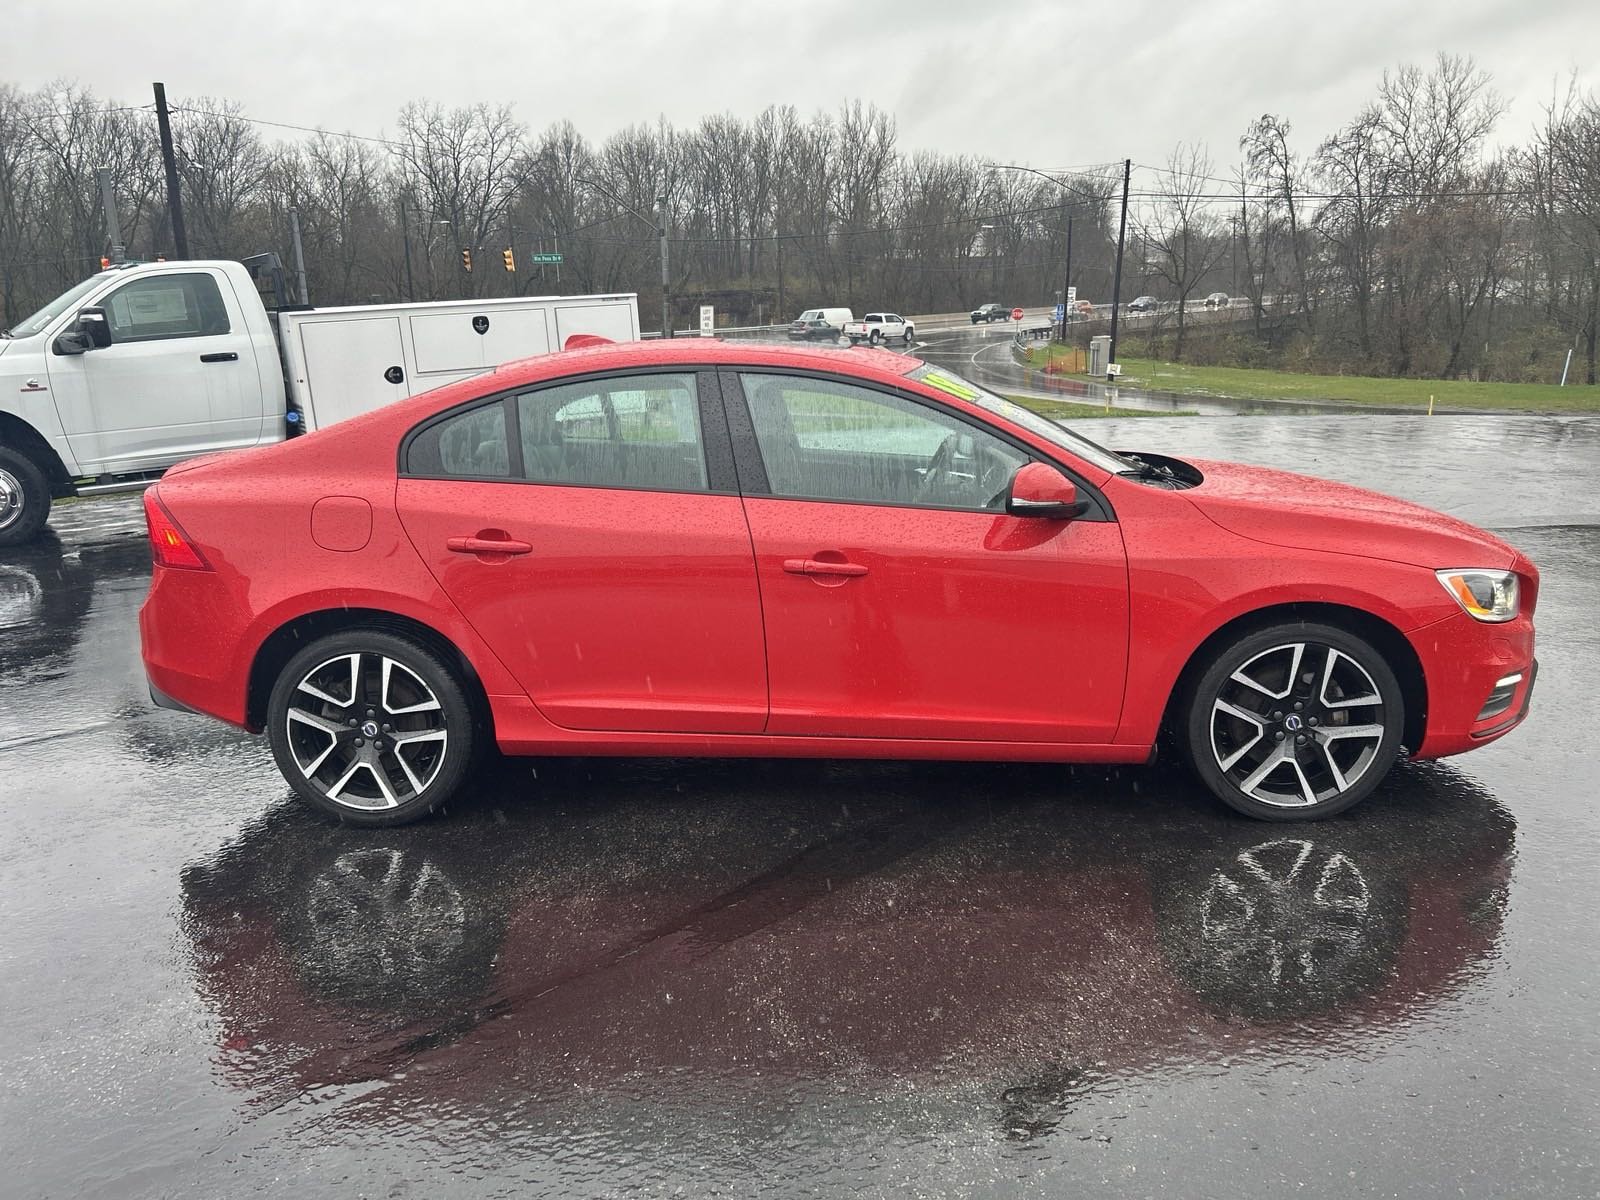 Used 2018 Volvo S60 Dynamic with VIN YV140MTL8J2459839 for sale in Lewisburg, PA